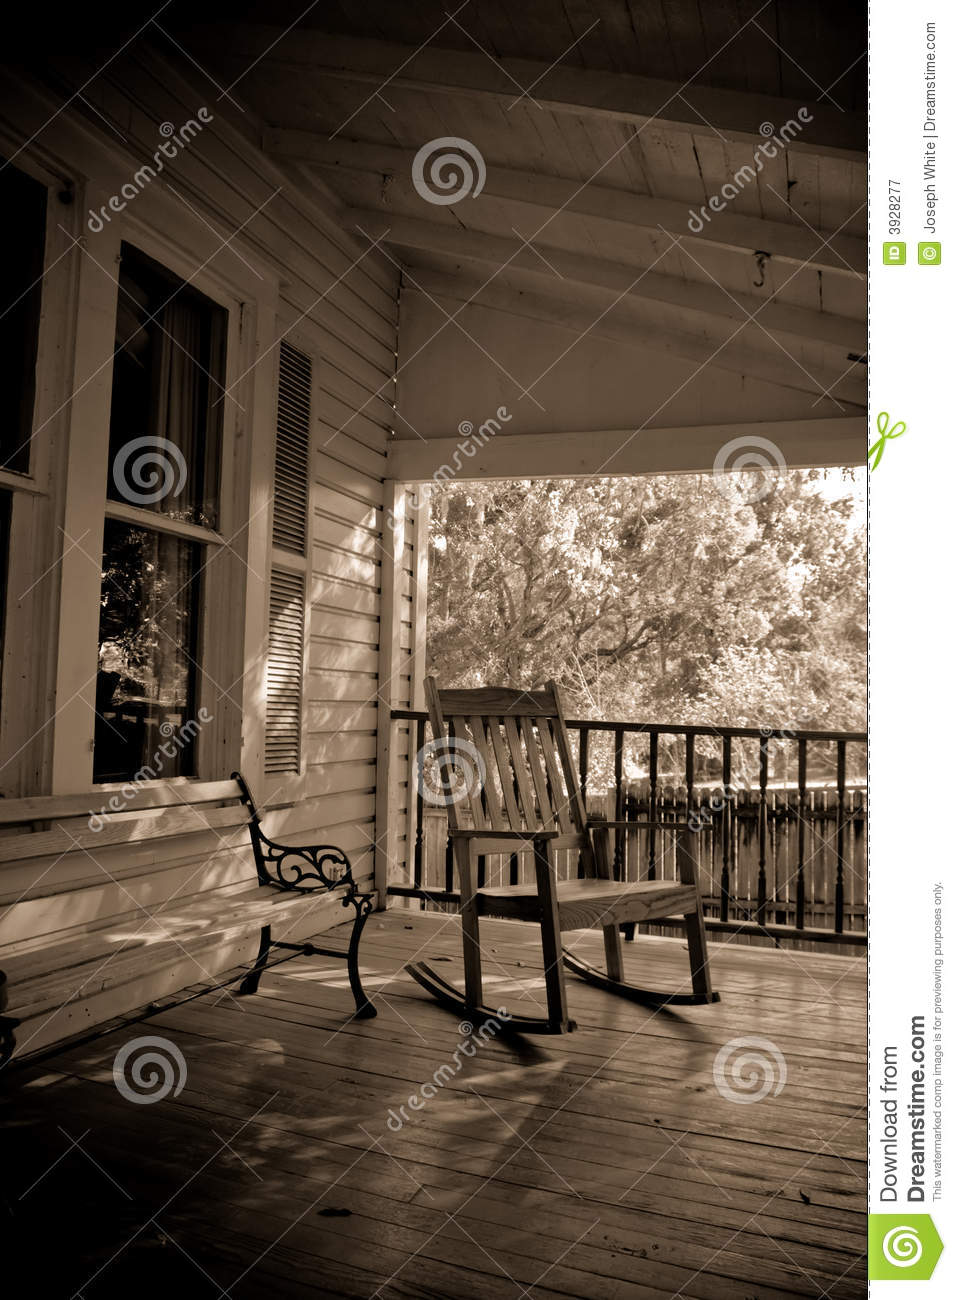 Sepia Old Time Country Porch Royalty Free Stock Photography   Image